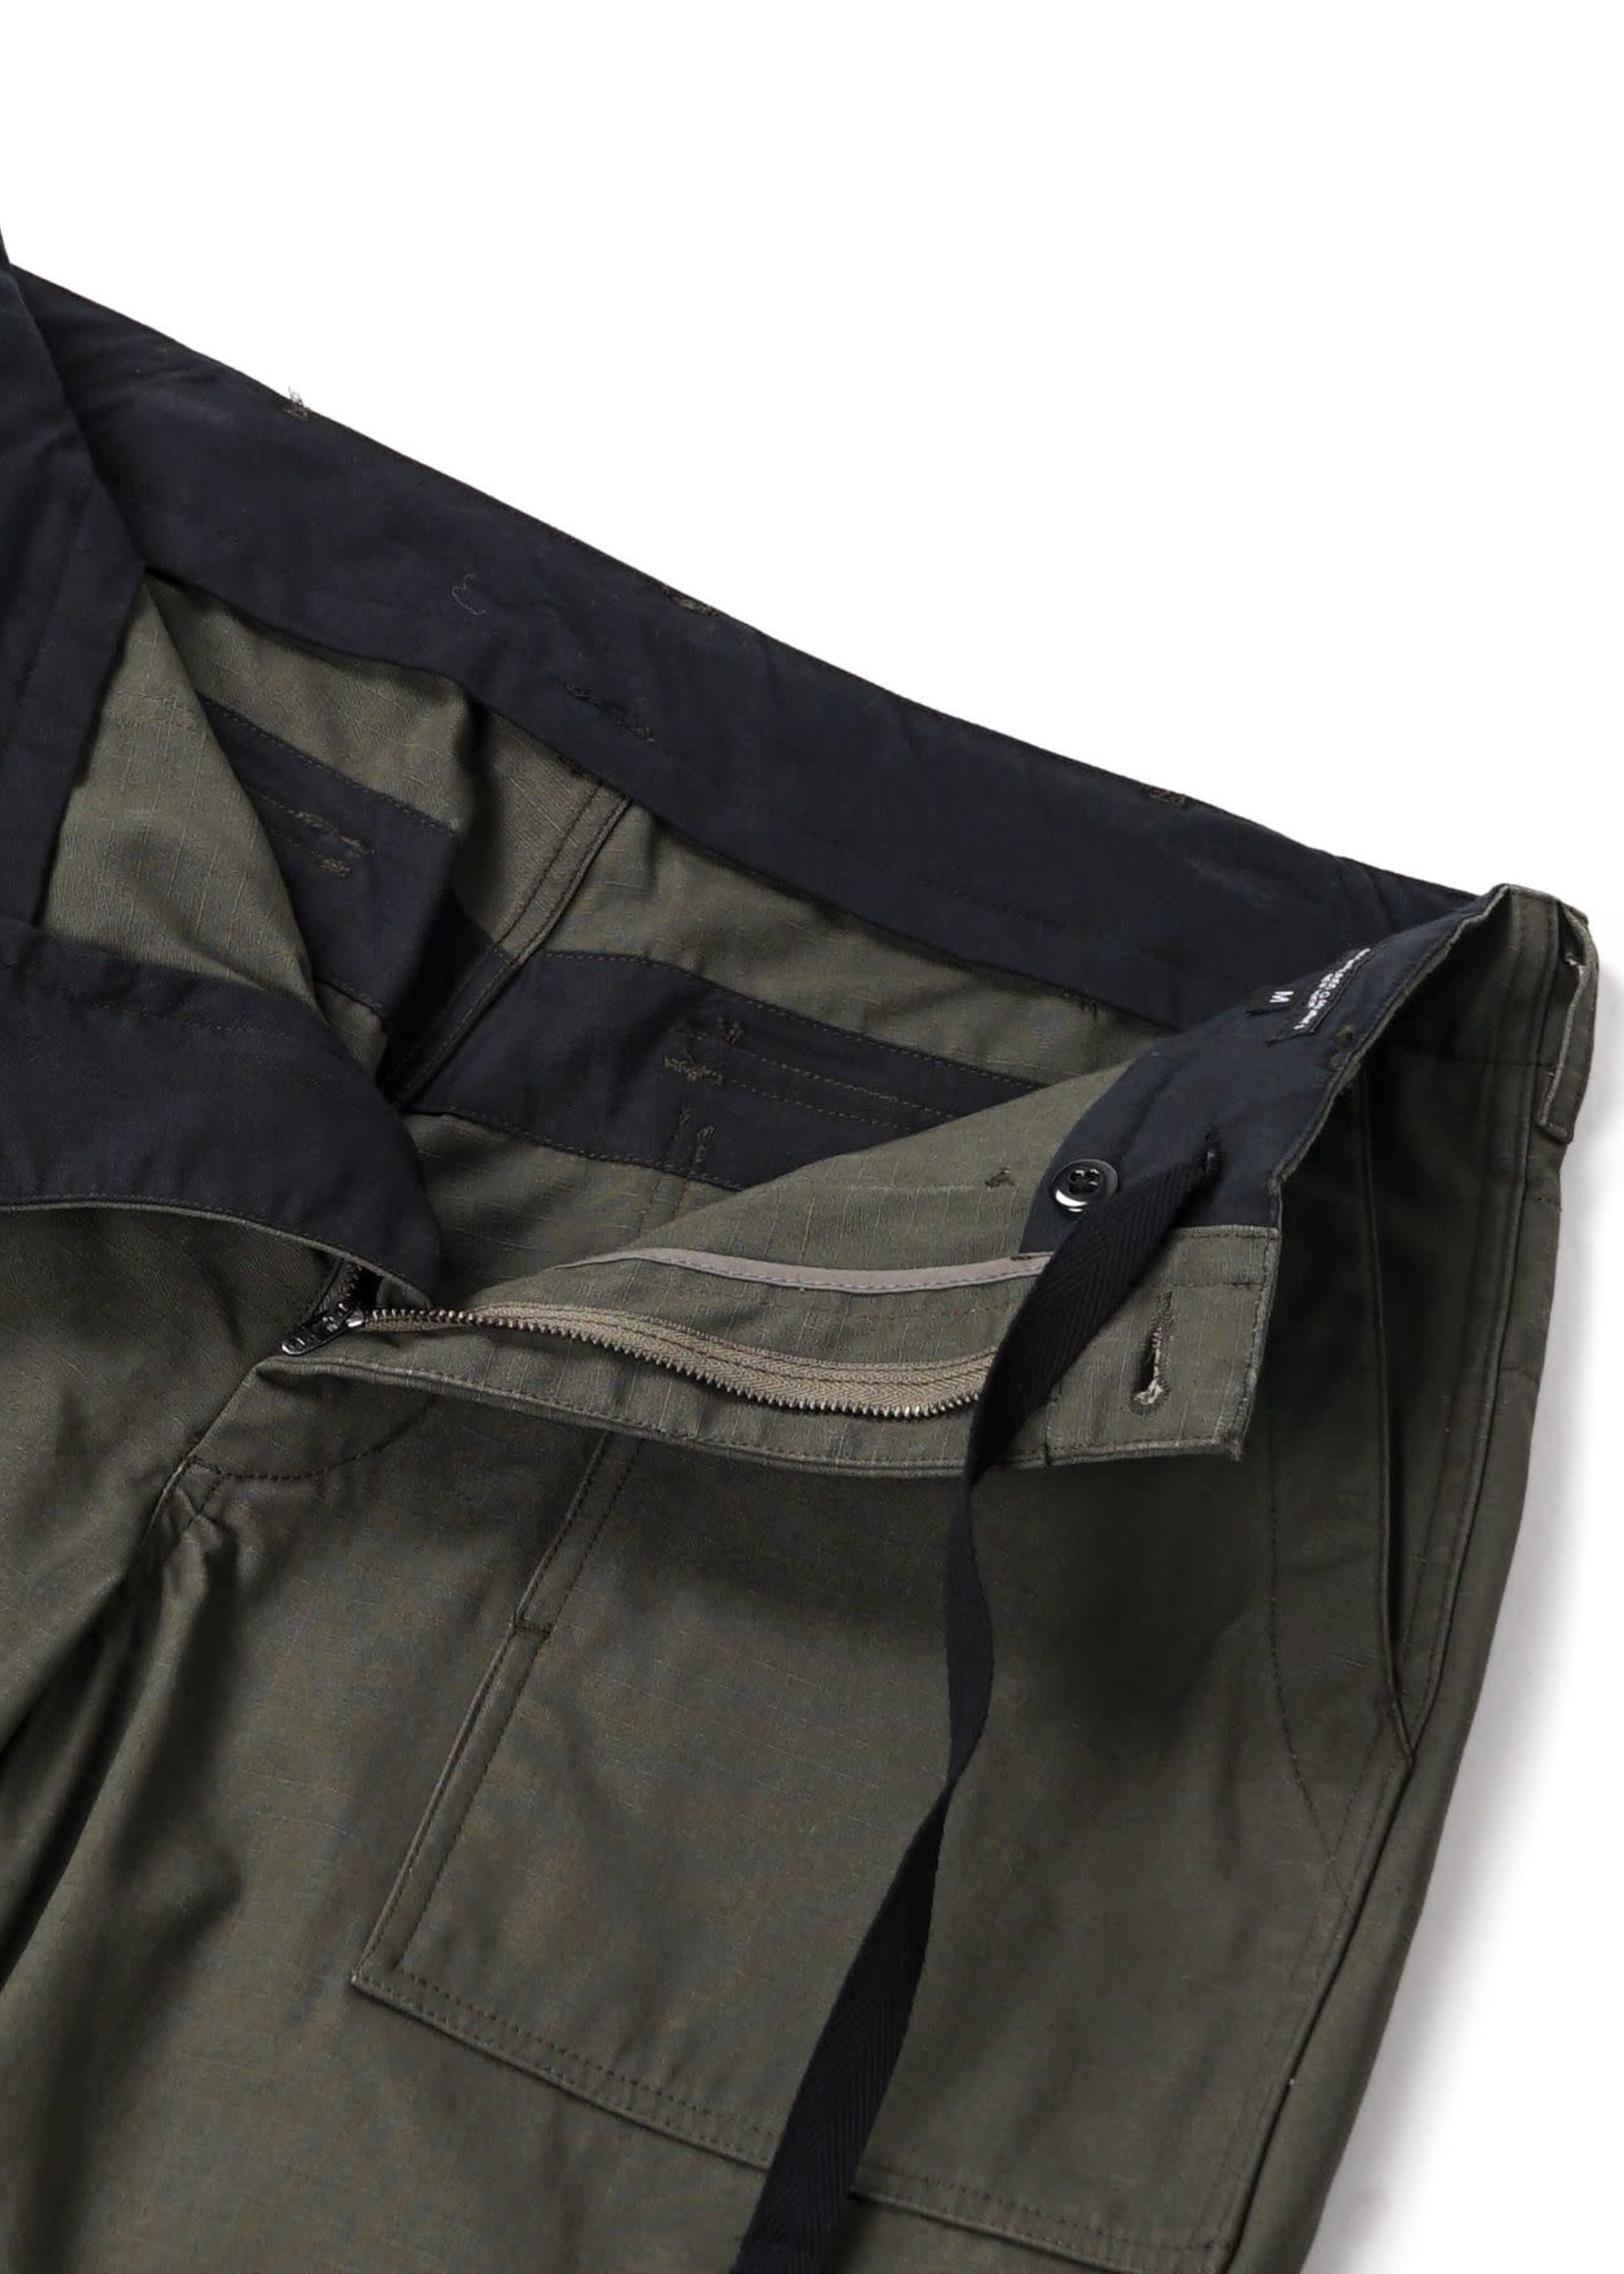 Engineered Garments Engineered Garments Fatigue Pant Olive Heavy Cotton Ripstop